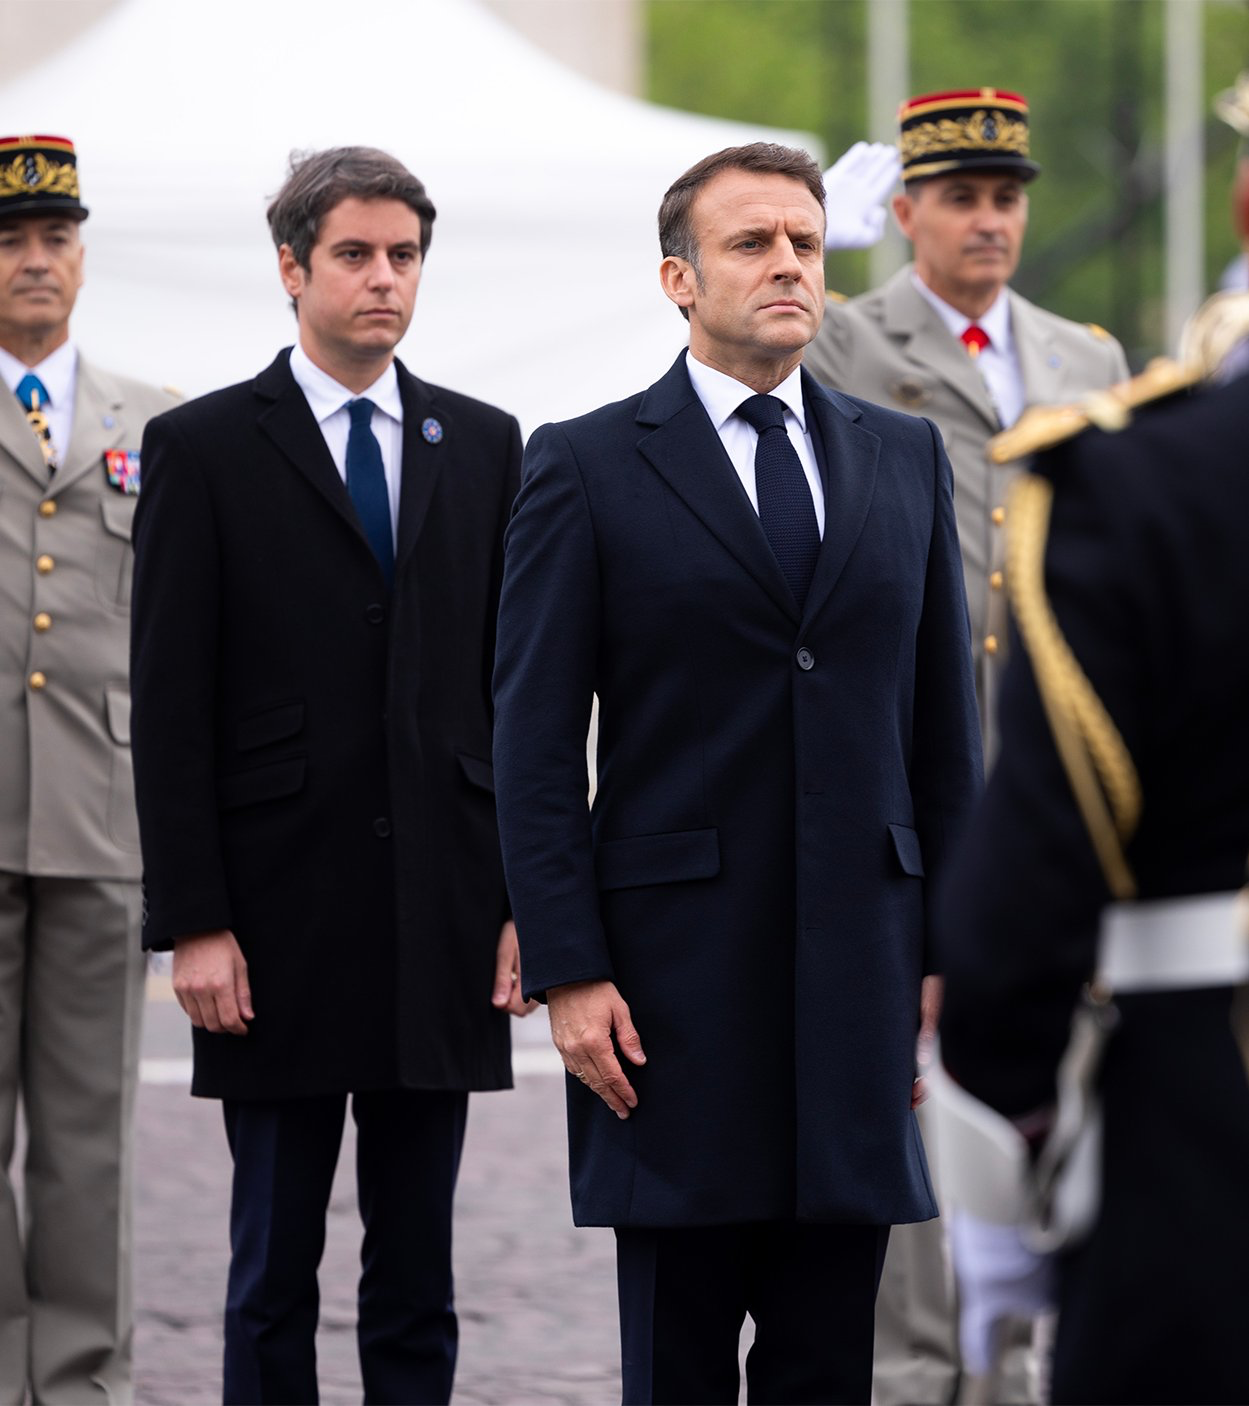 French President and Prime Minister at the celebration of the 79th anniversary of the allies victory during World War II